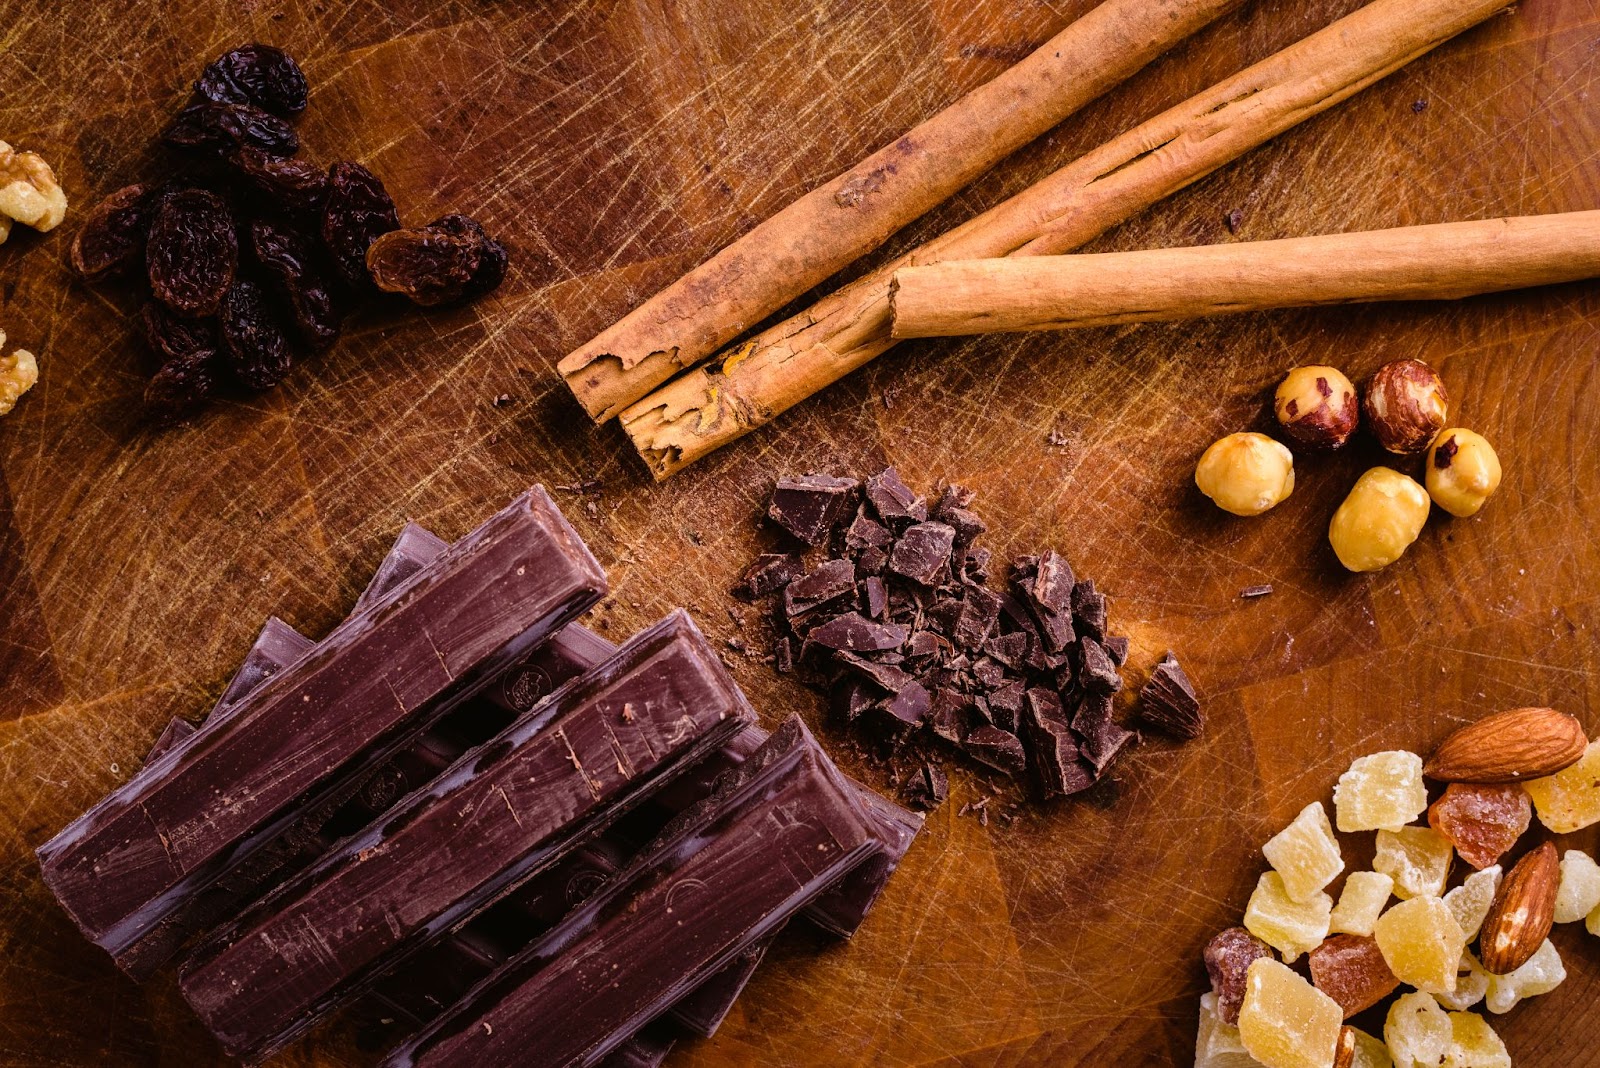 A plate adorned with dark chocolate chips and bars, complemented by cinnamon sticks, hazelnuts, and dried fruits.